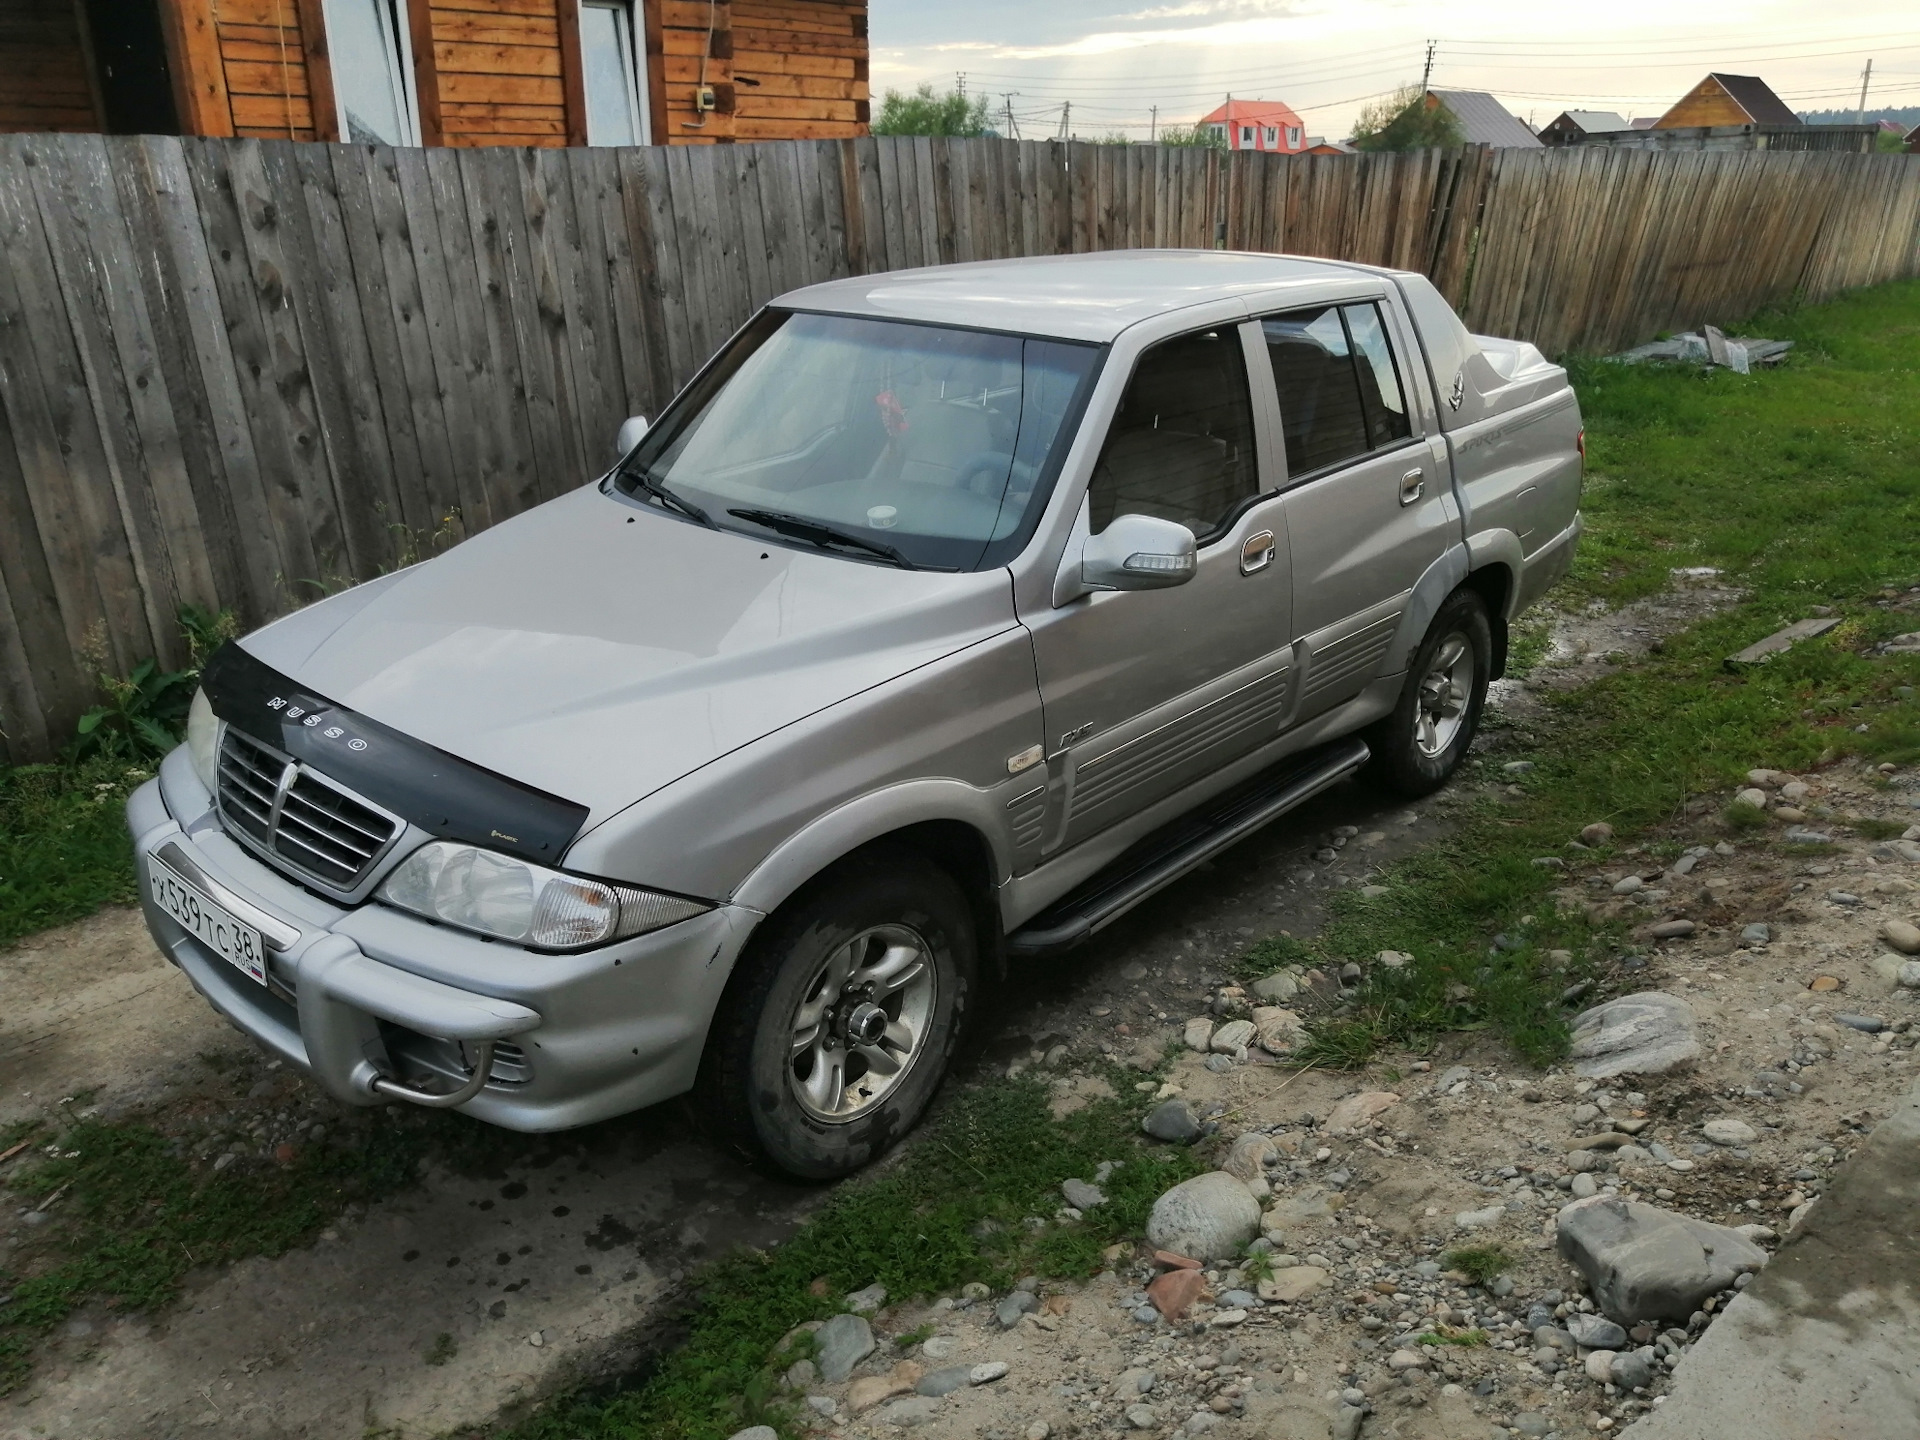 Ssangyong musso sports. ССАНГЙОНГ Муссо спорт. SSANGYONG Musso Sports, 2005. Саньенг Муссо спорт 2005.